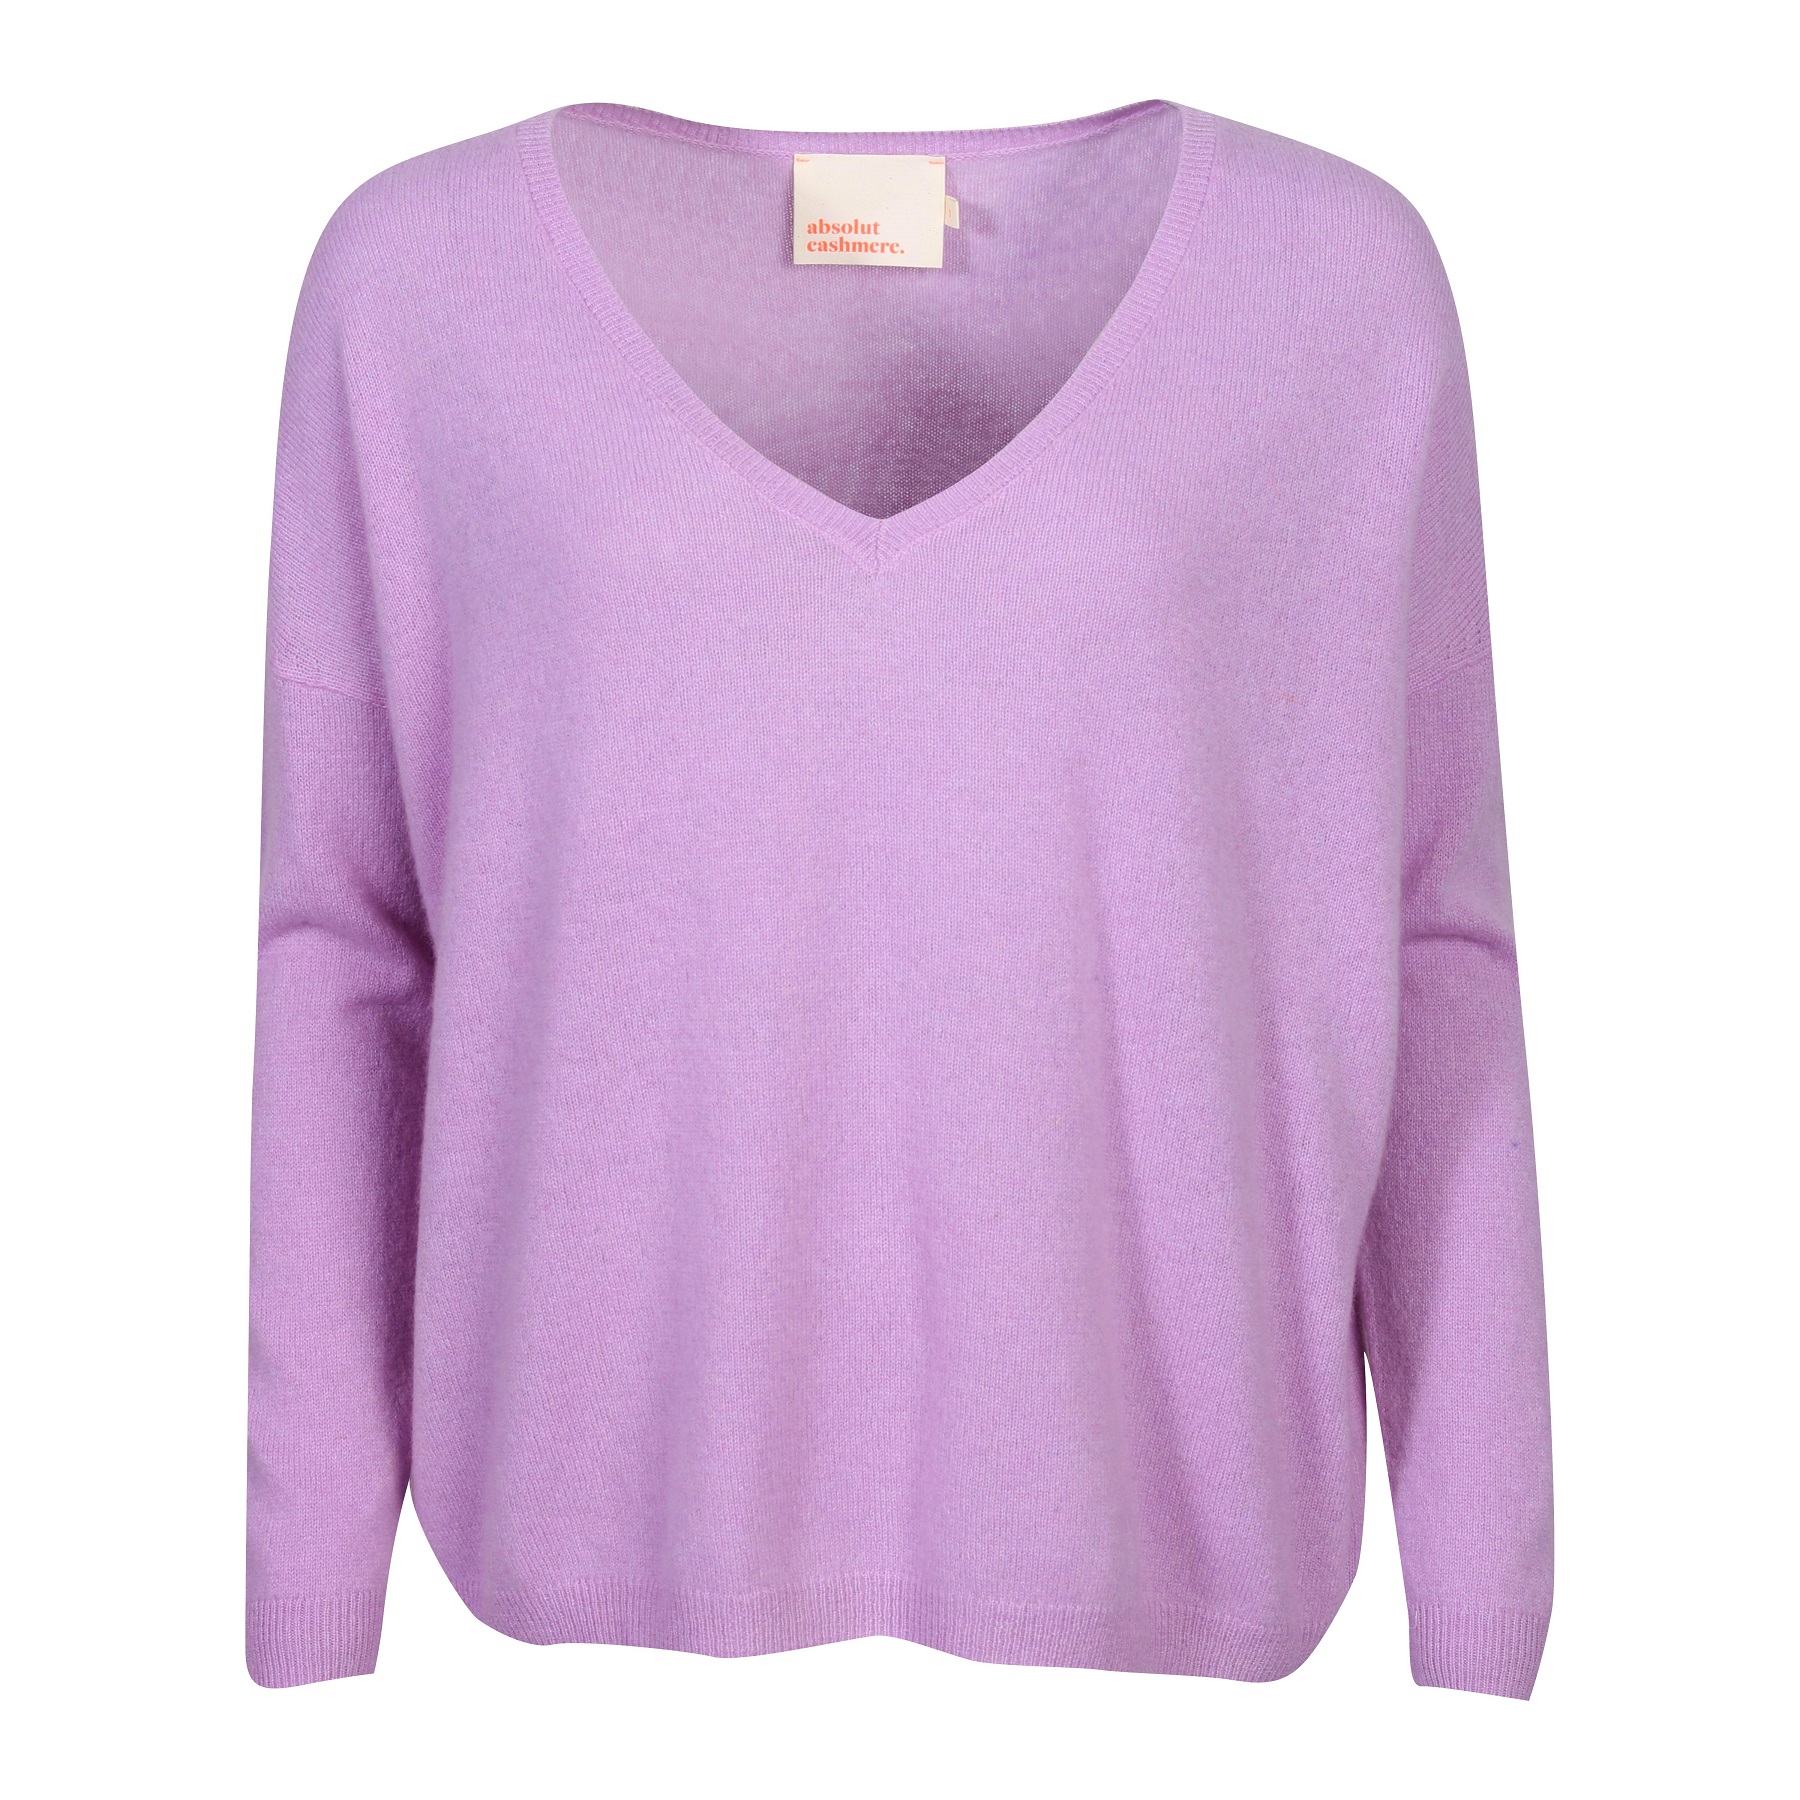 Absolut Cashmere Pullover Angele in Lilac S